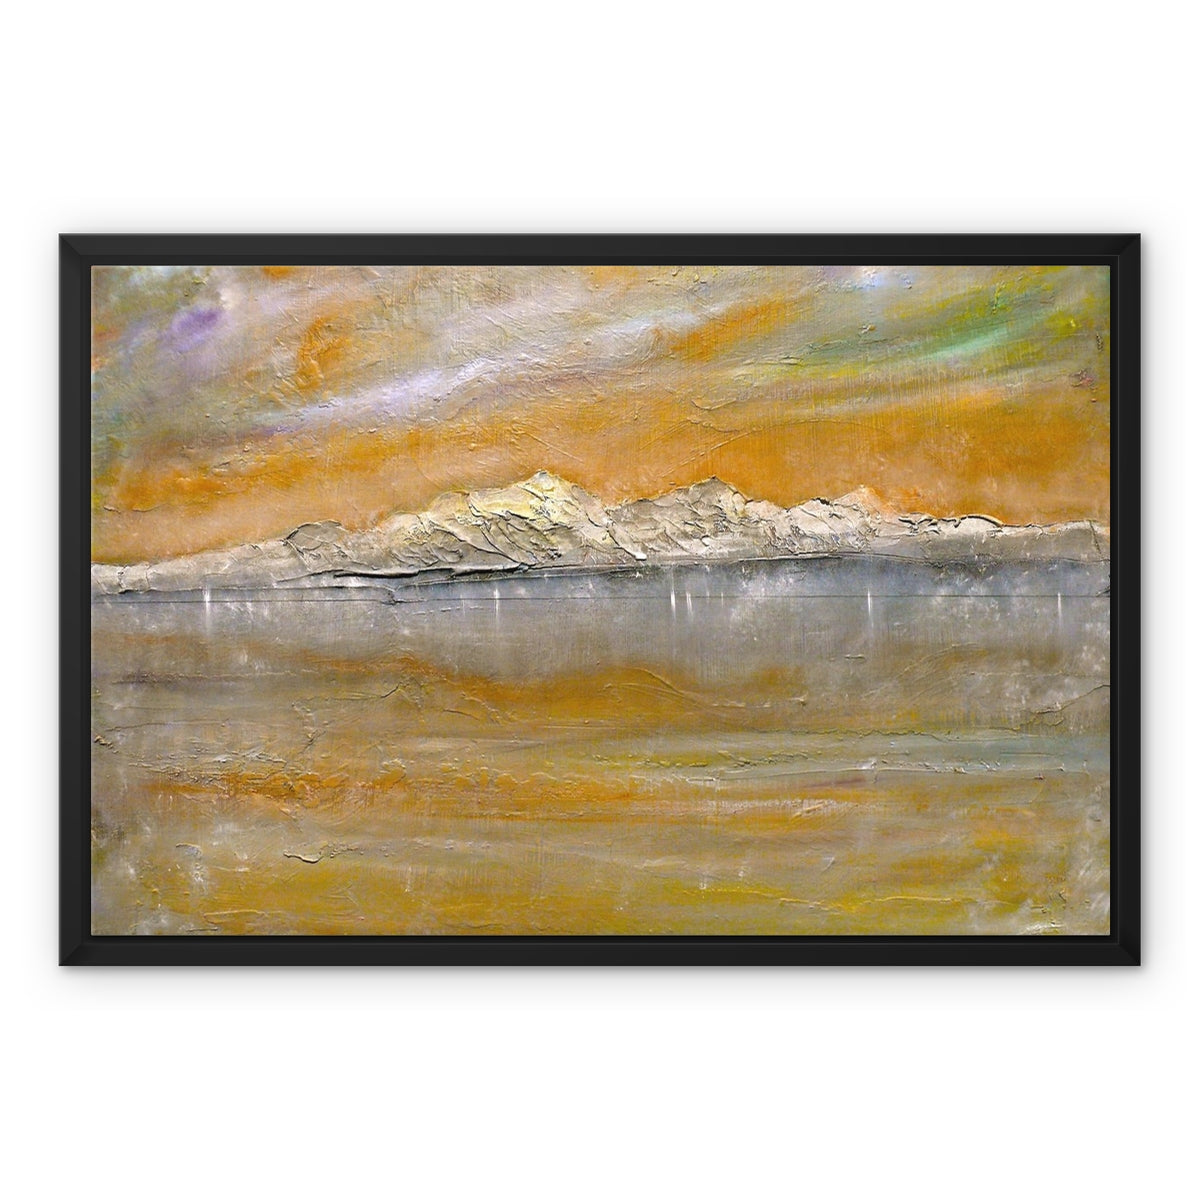 Arran Snow Painting | Framed Canvas From Scotland-Floating Framed Canvas Prints-Arran Art Gallery-24"x18"-Black Frame-Paintings, Prints, Homeware, Art Gifts From Scotland By Scottish Artist Kevin Hunter